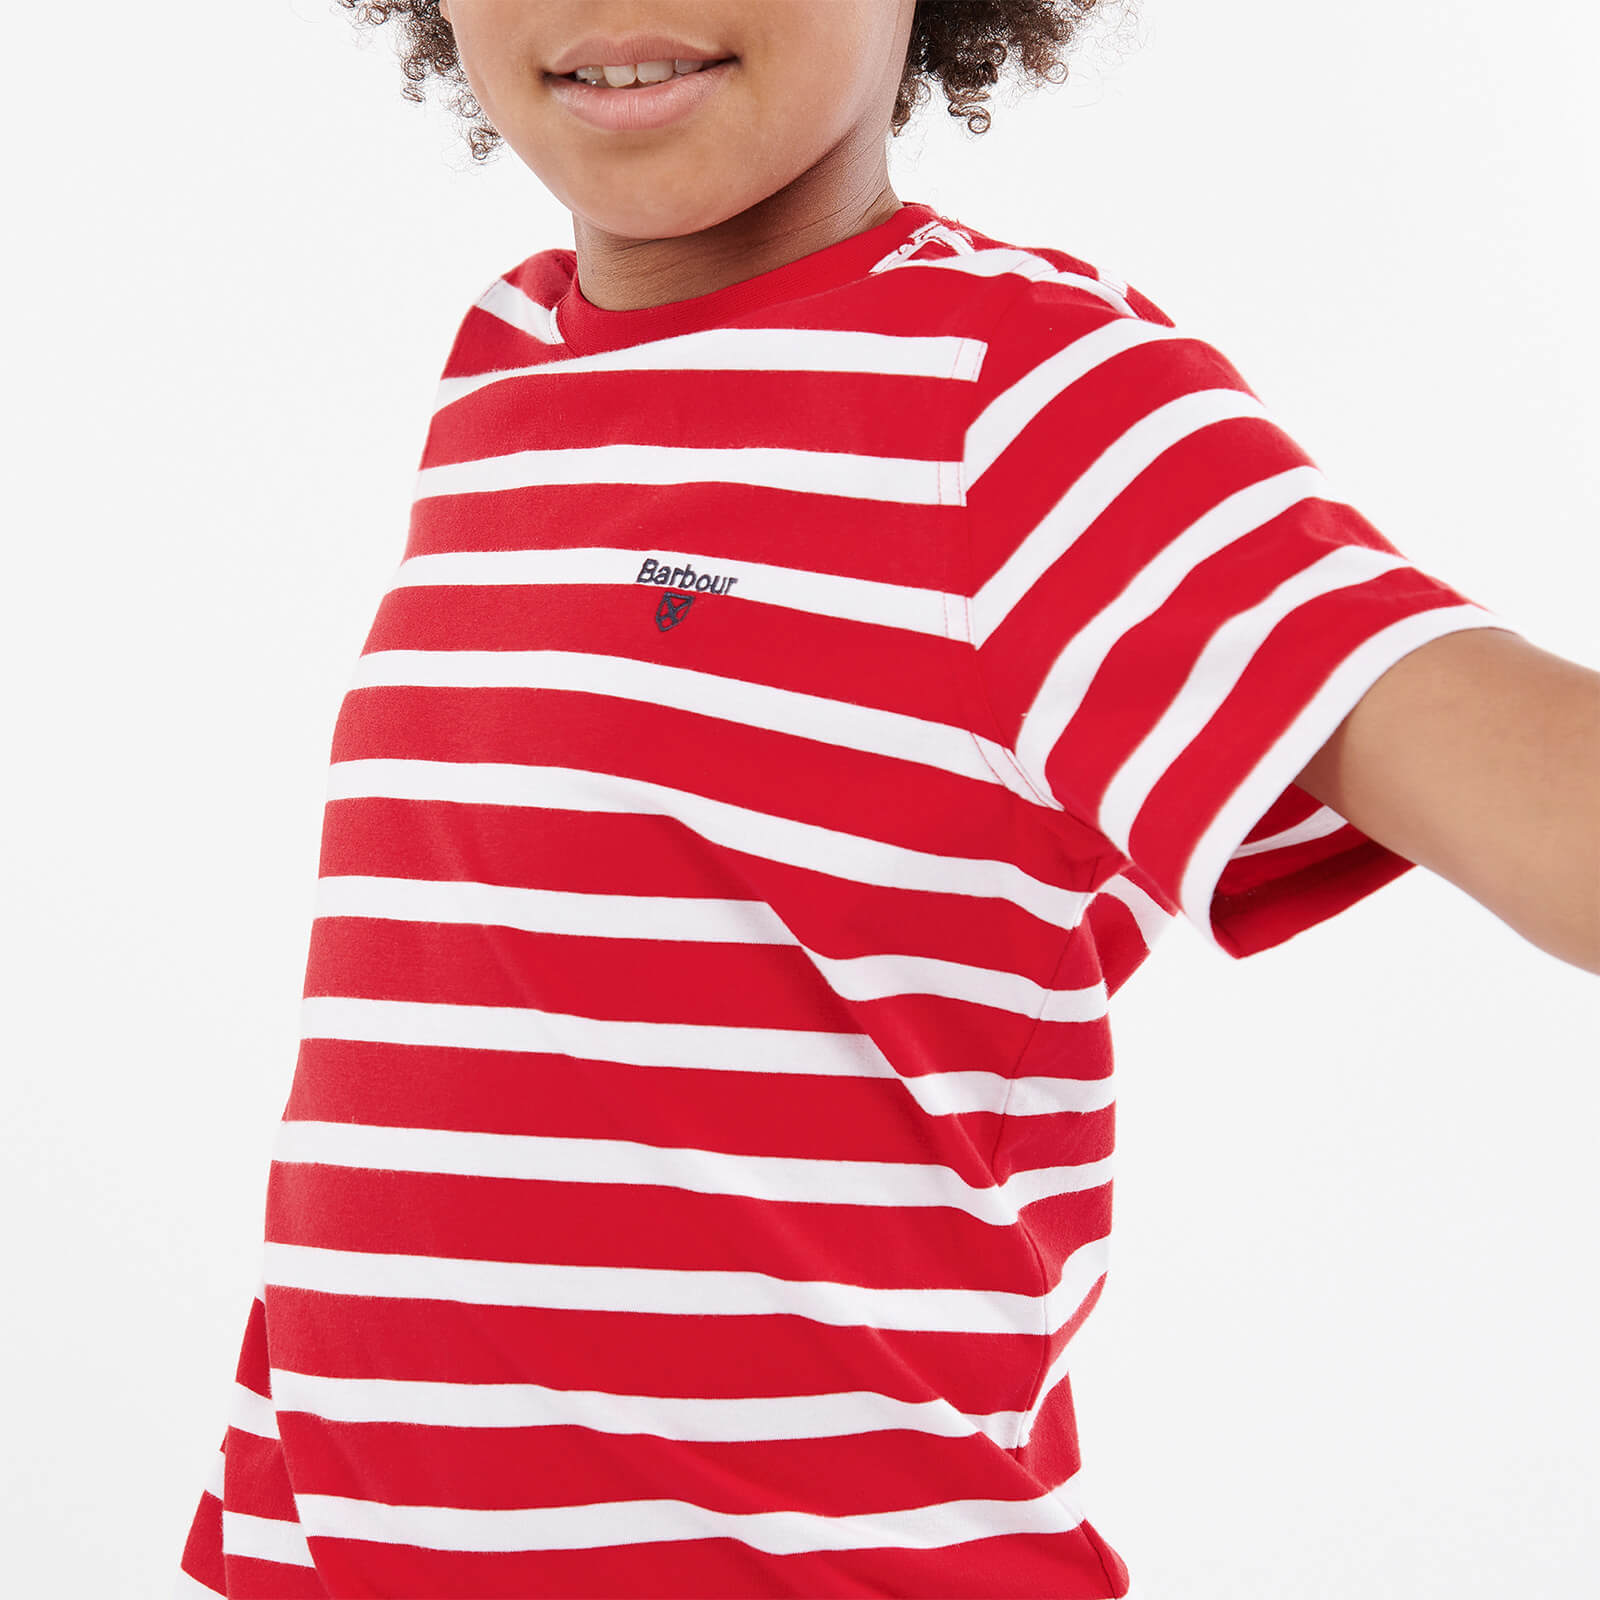 Barbour Boys' Monty T-Shirt - Racing Red -  14-15 Years